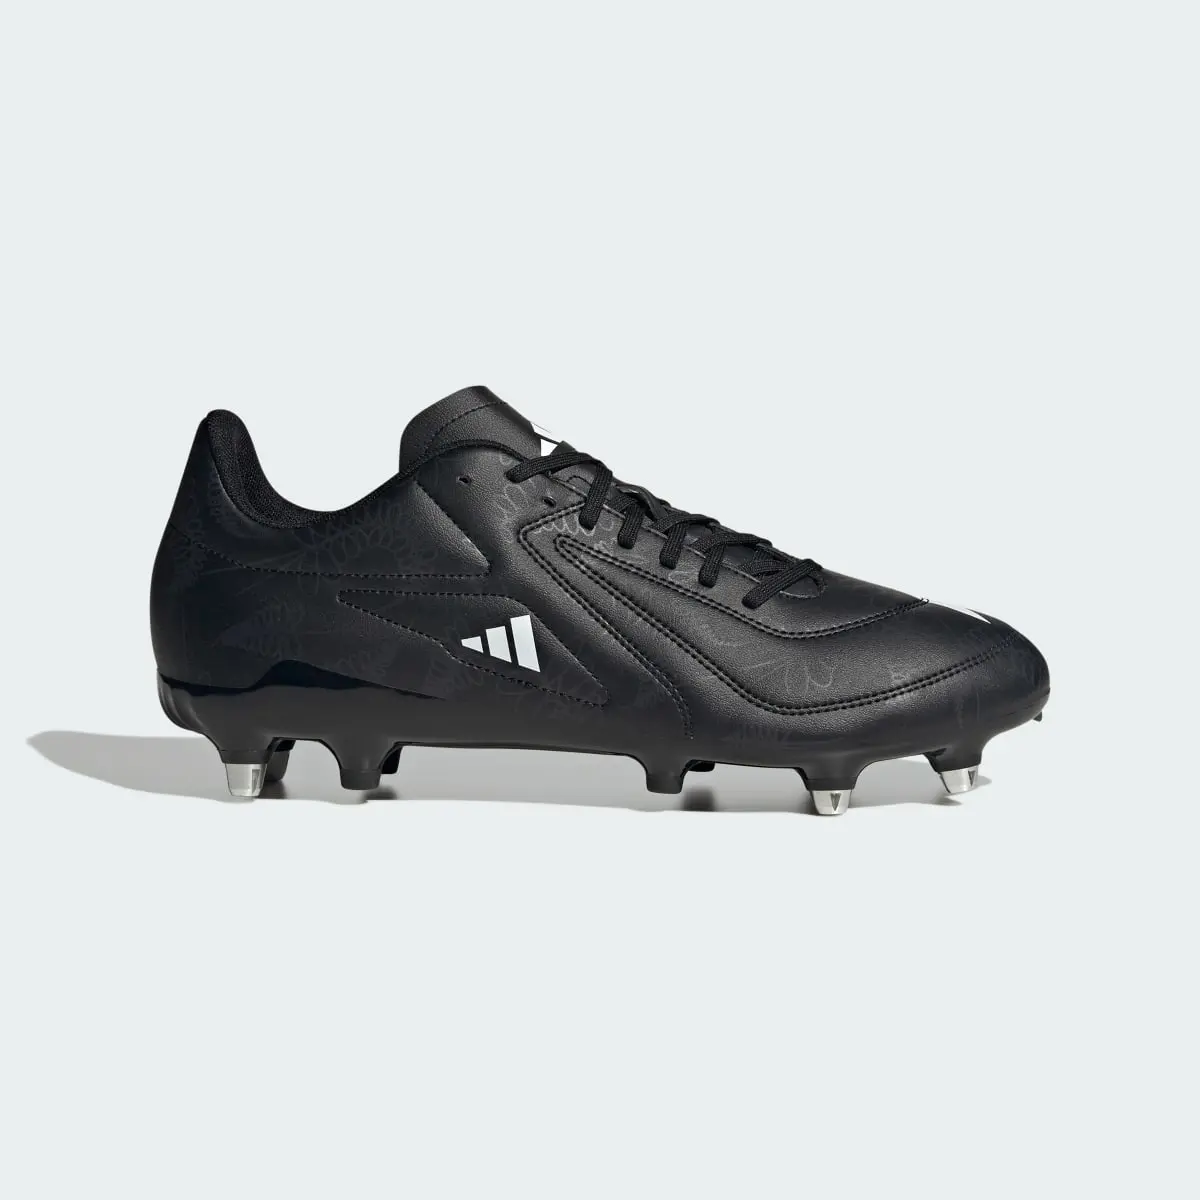 Adidas RS15 Soft Ground Rugby Boots. 2